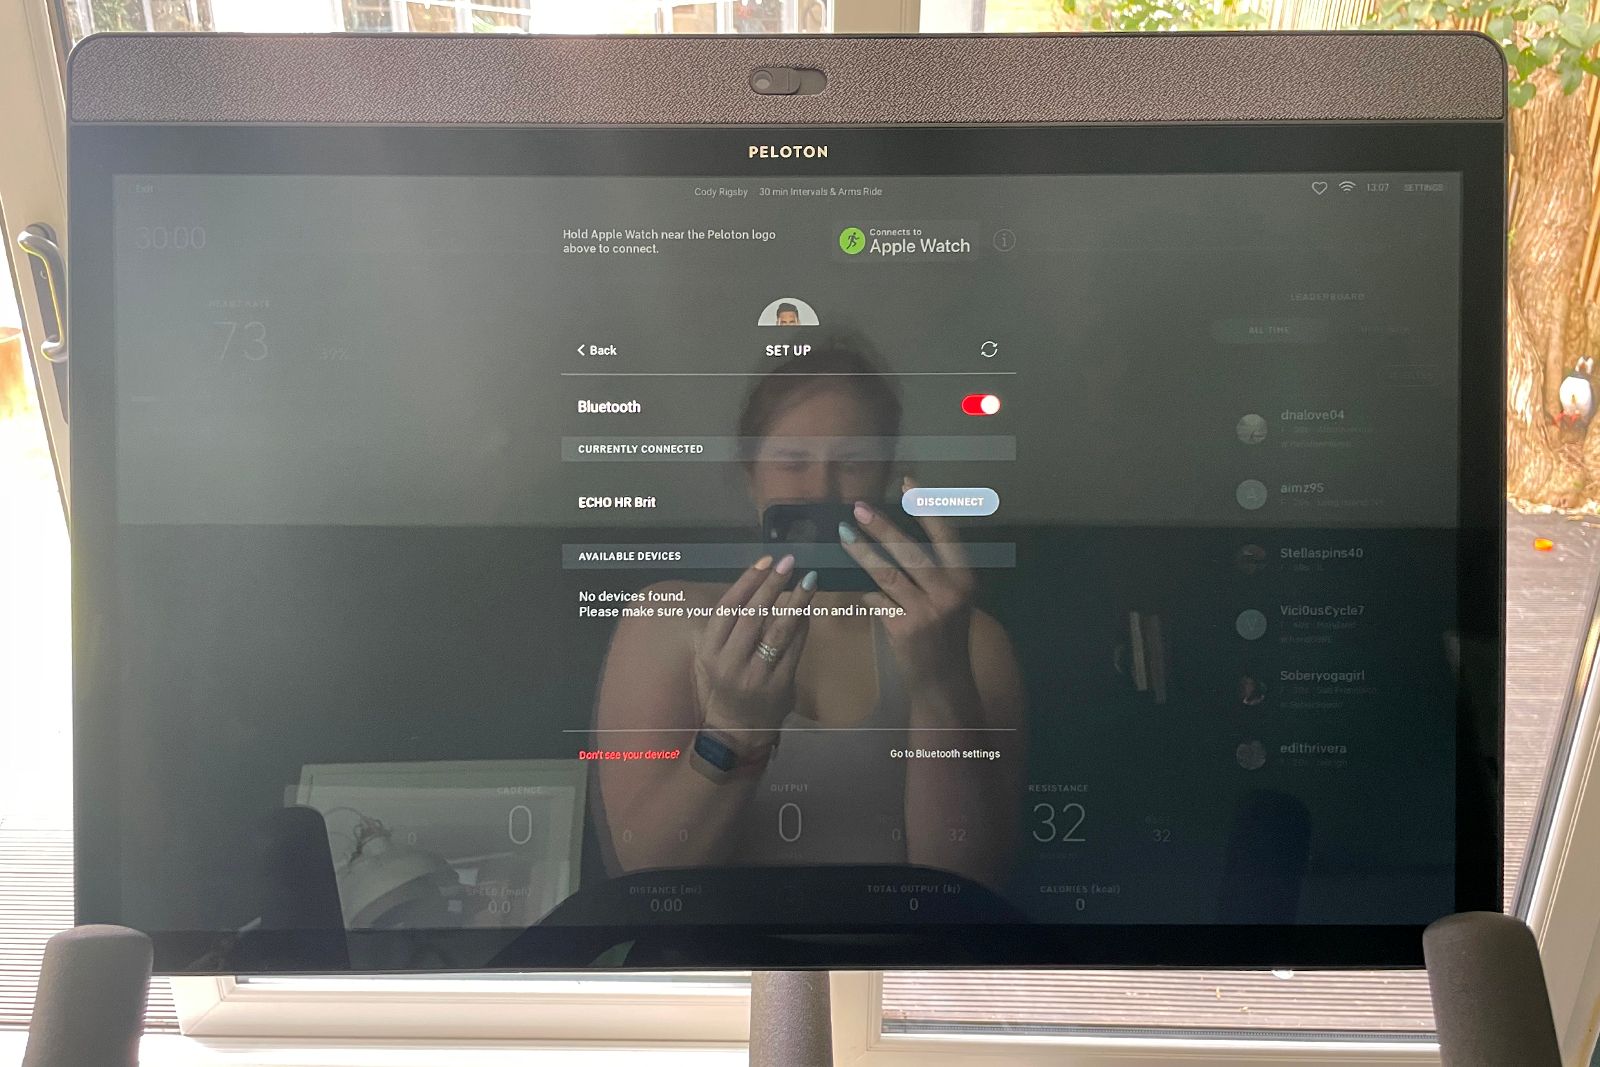 How to use the Apple Watch with Peloton photo 1